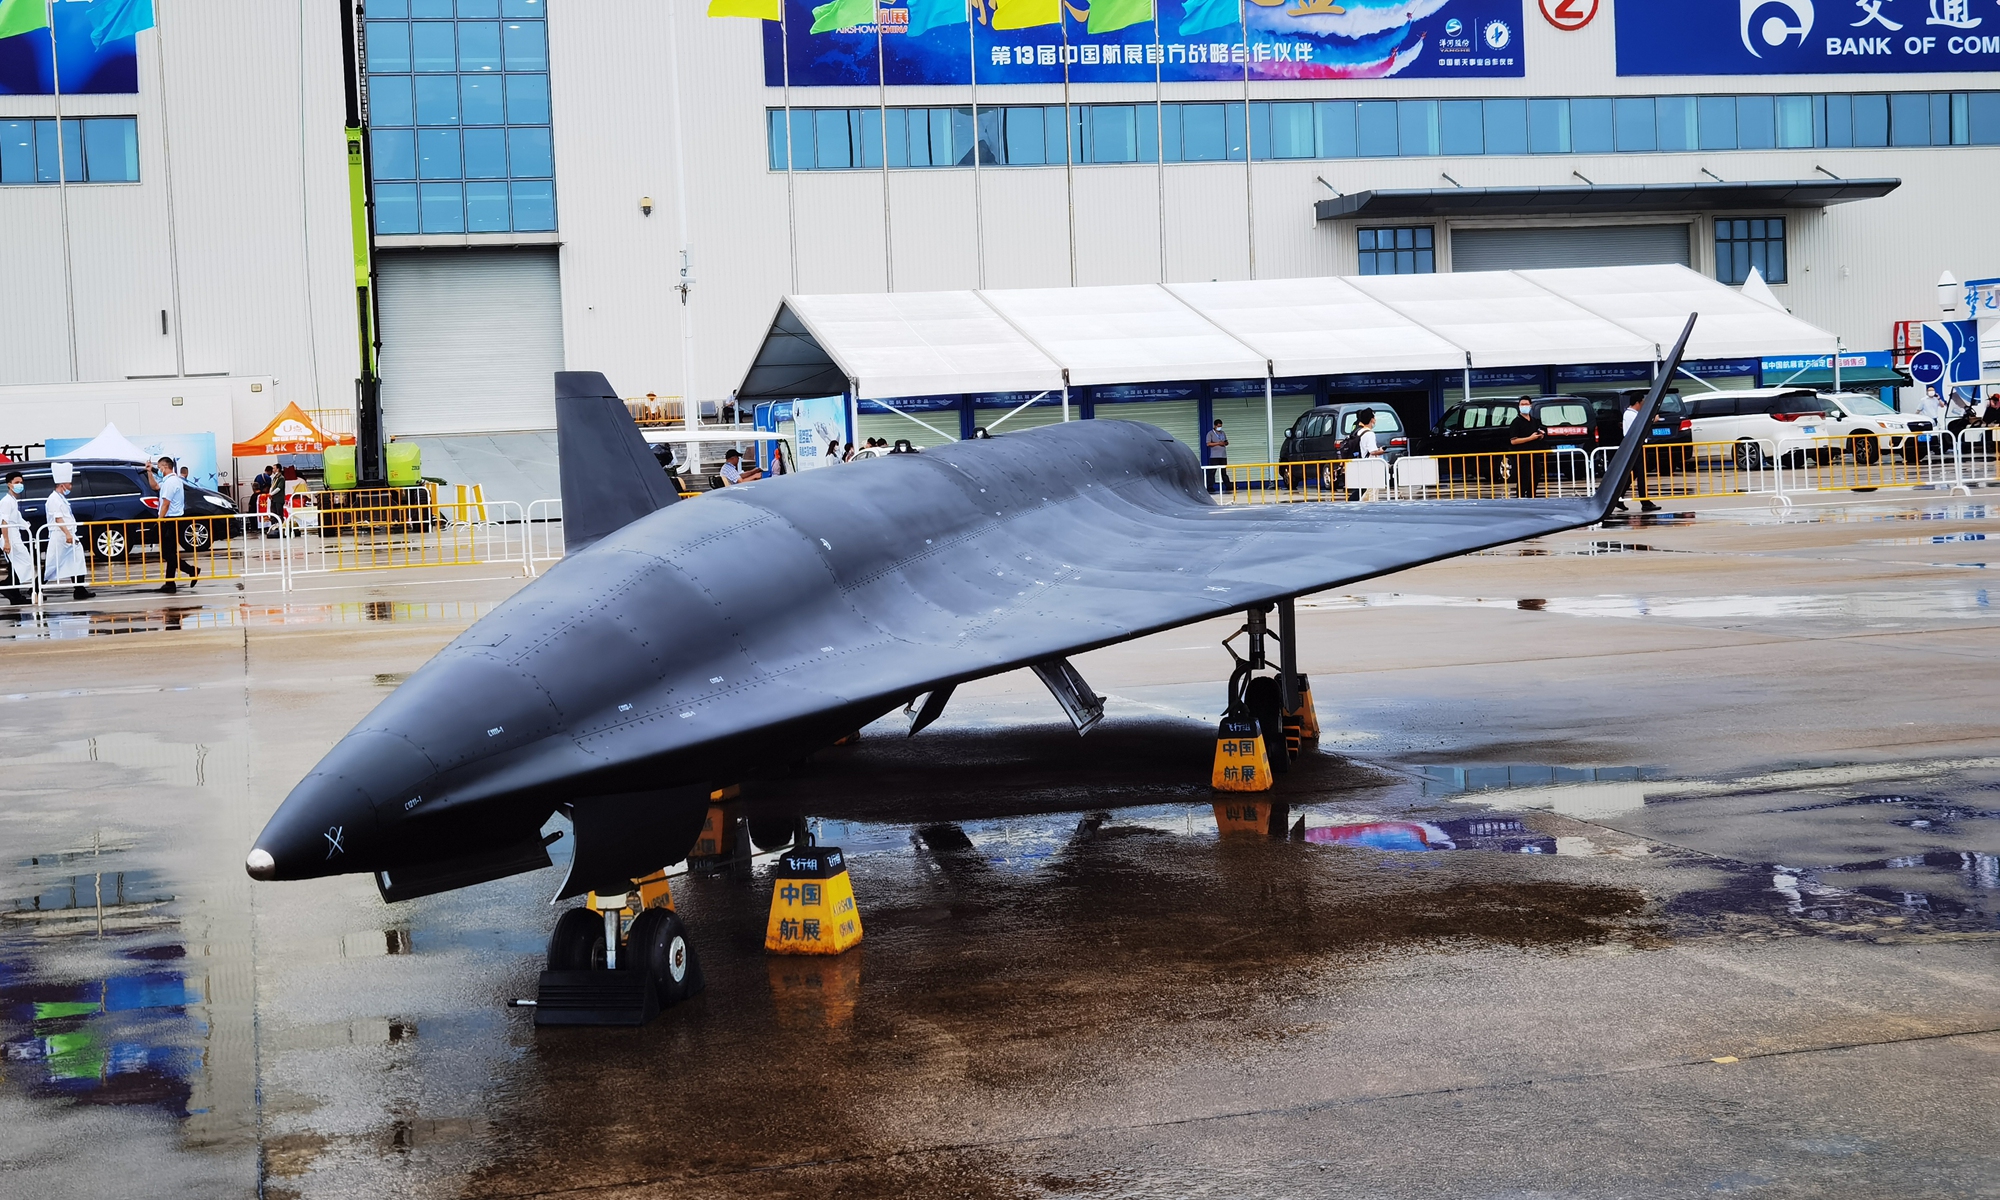 China's advanced stealth drones make air show debut Global Times